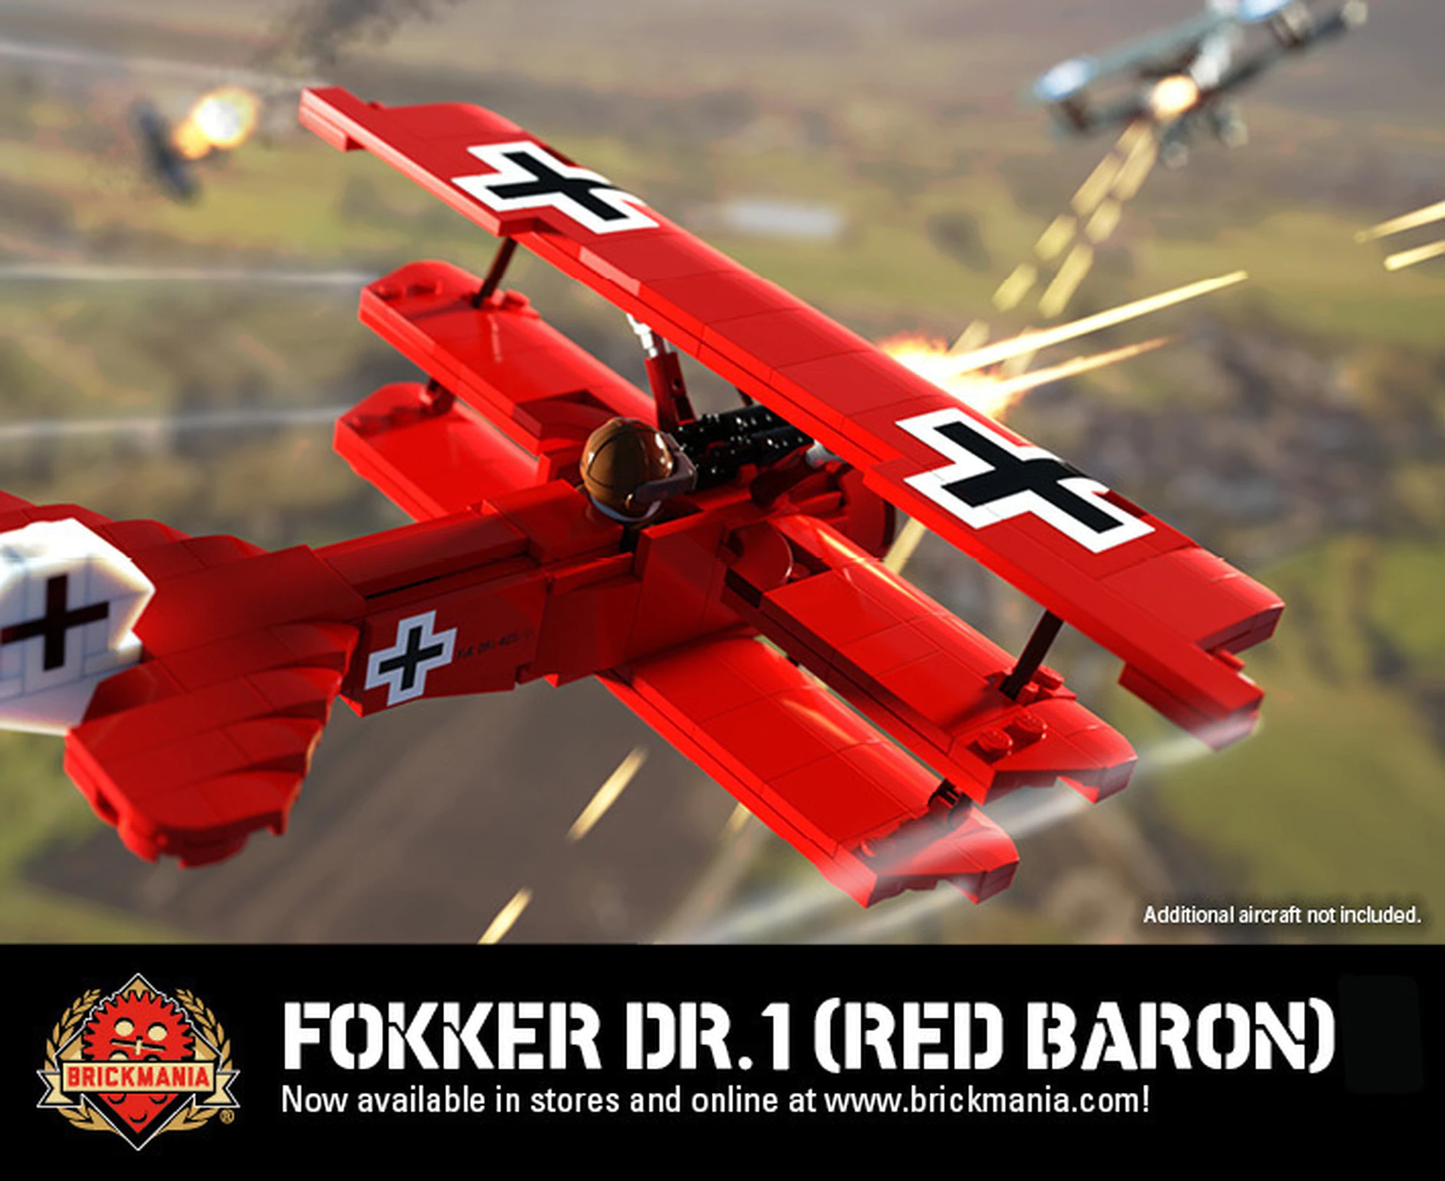 Load image into Gallery viewer, Fokker Dr.1 (Red Baron) - World War I Fighter Aircraft - MOMCOM inc.
